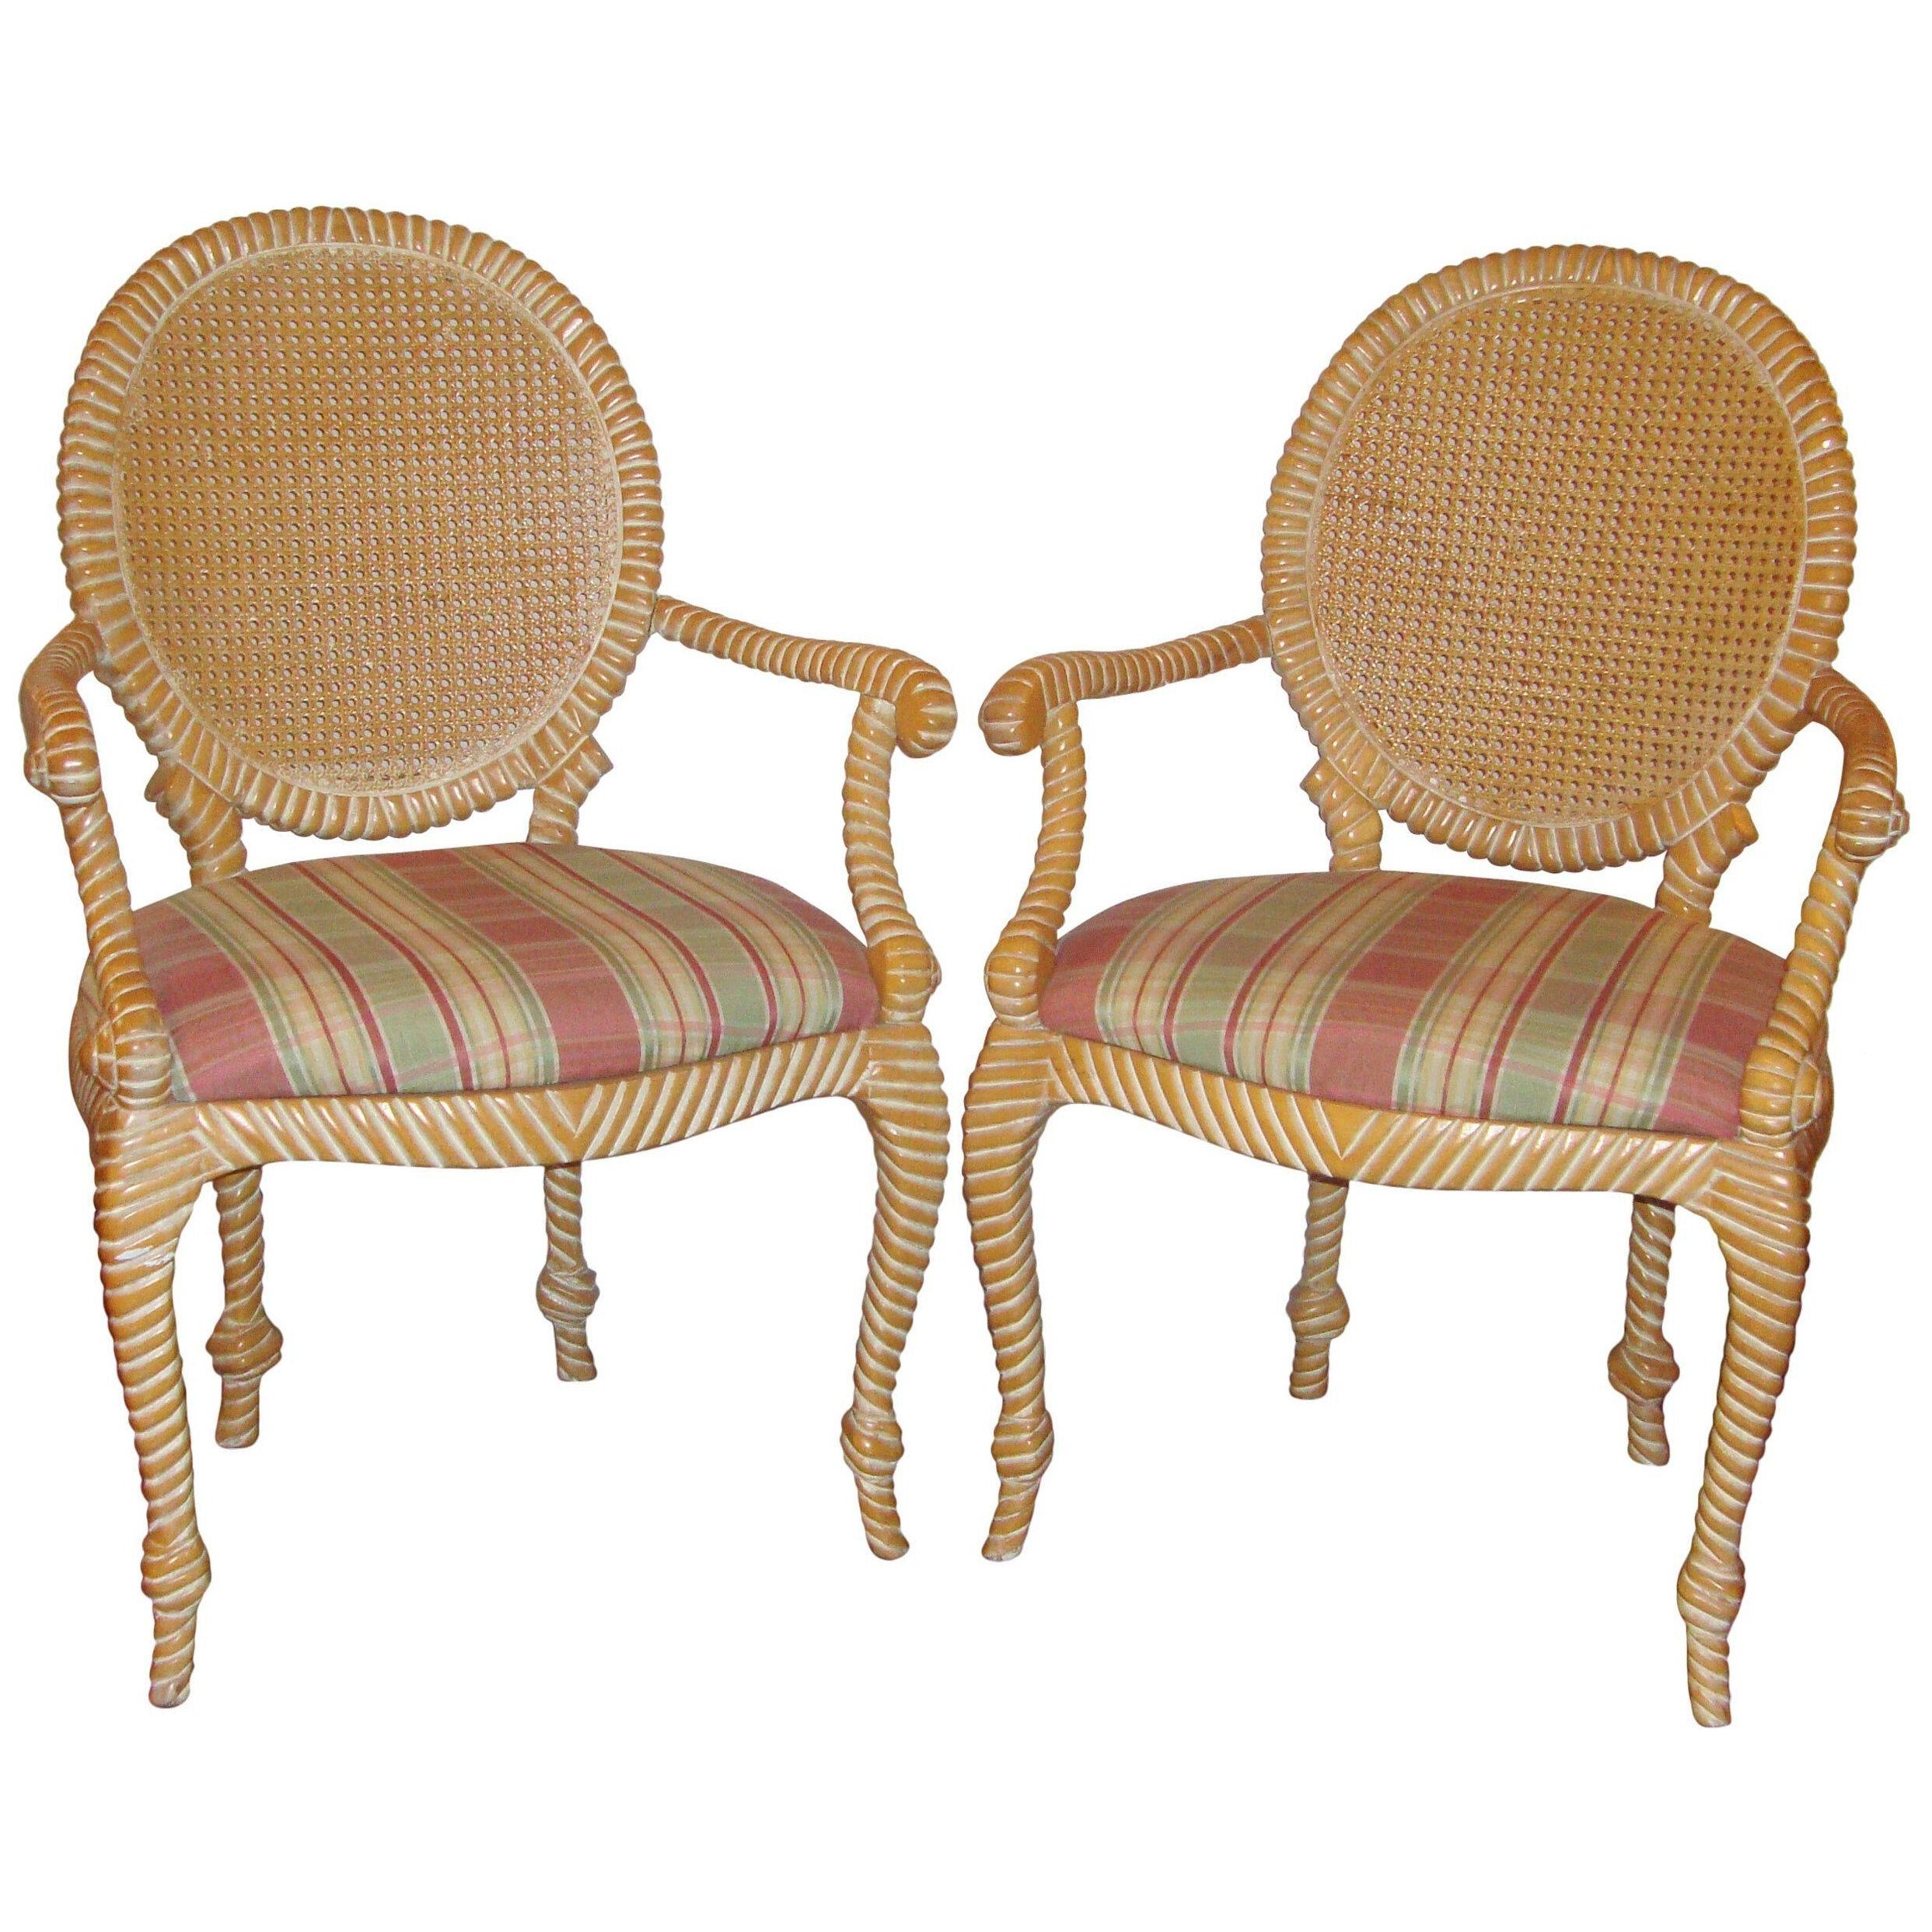 Pair of Twisted and Knotted Form Armchairs